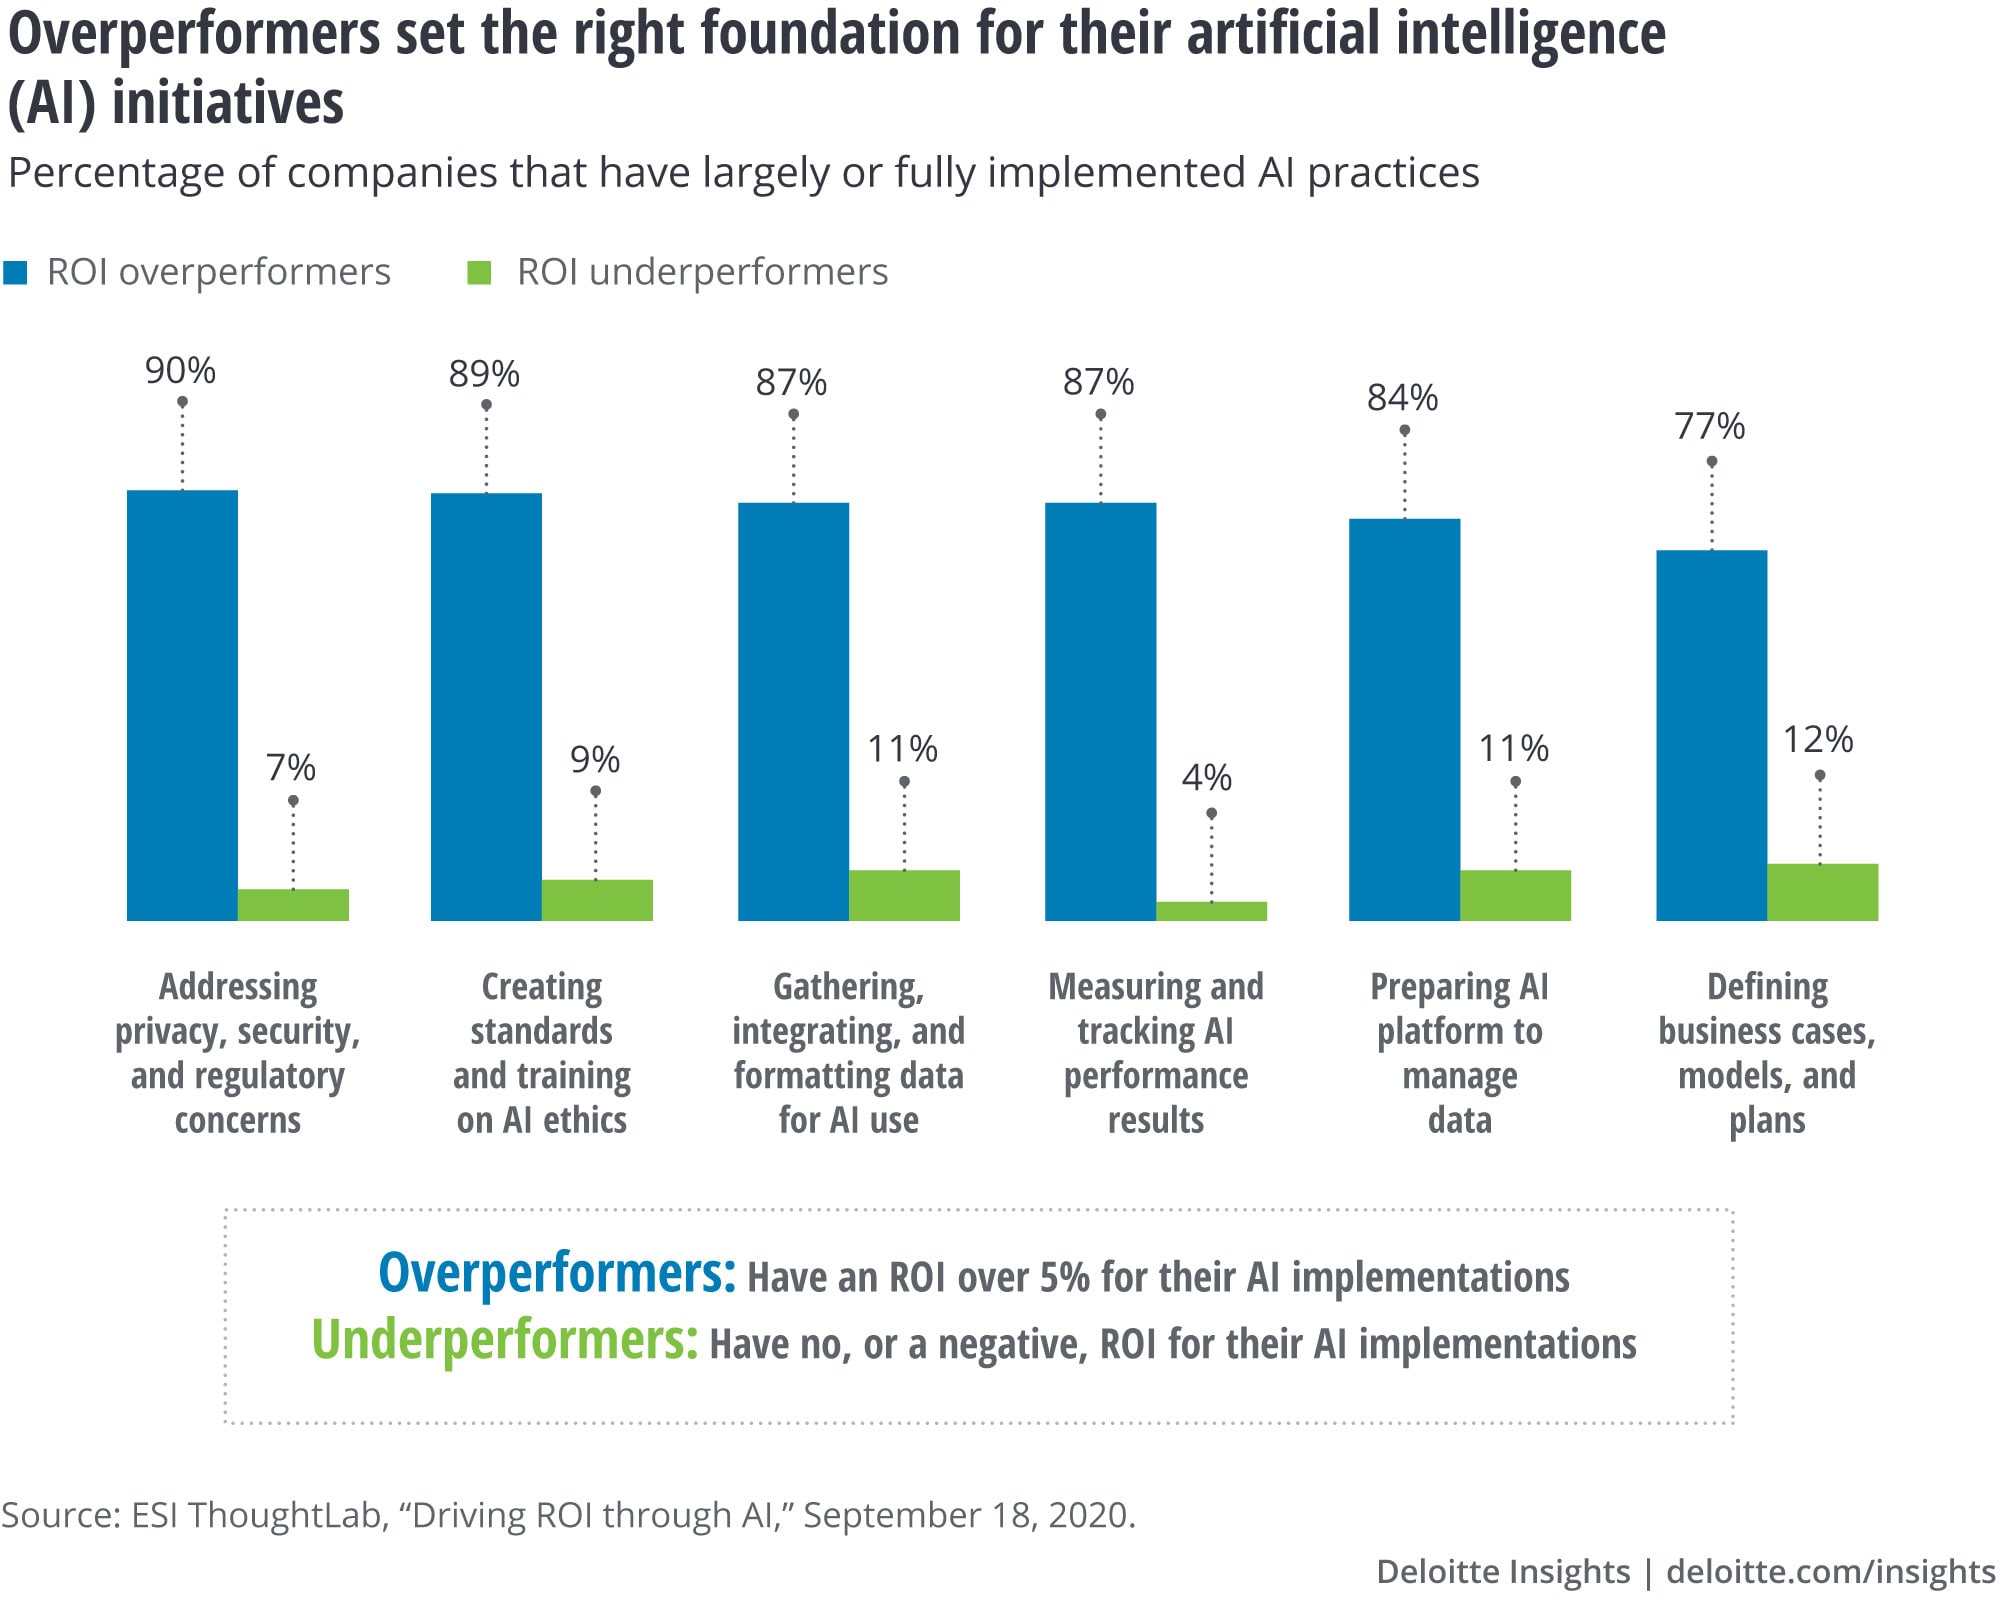 Overperformers set the right foundation for their AI initiatives